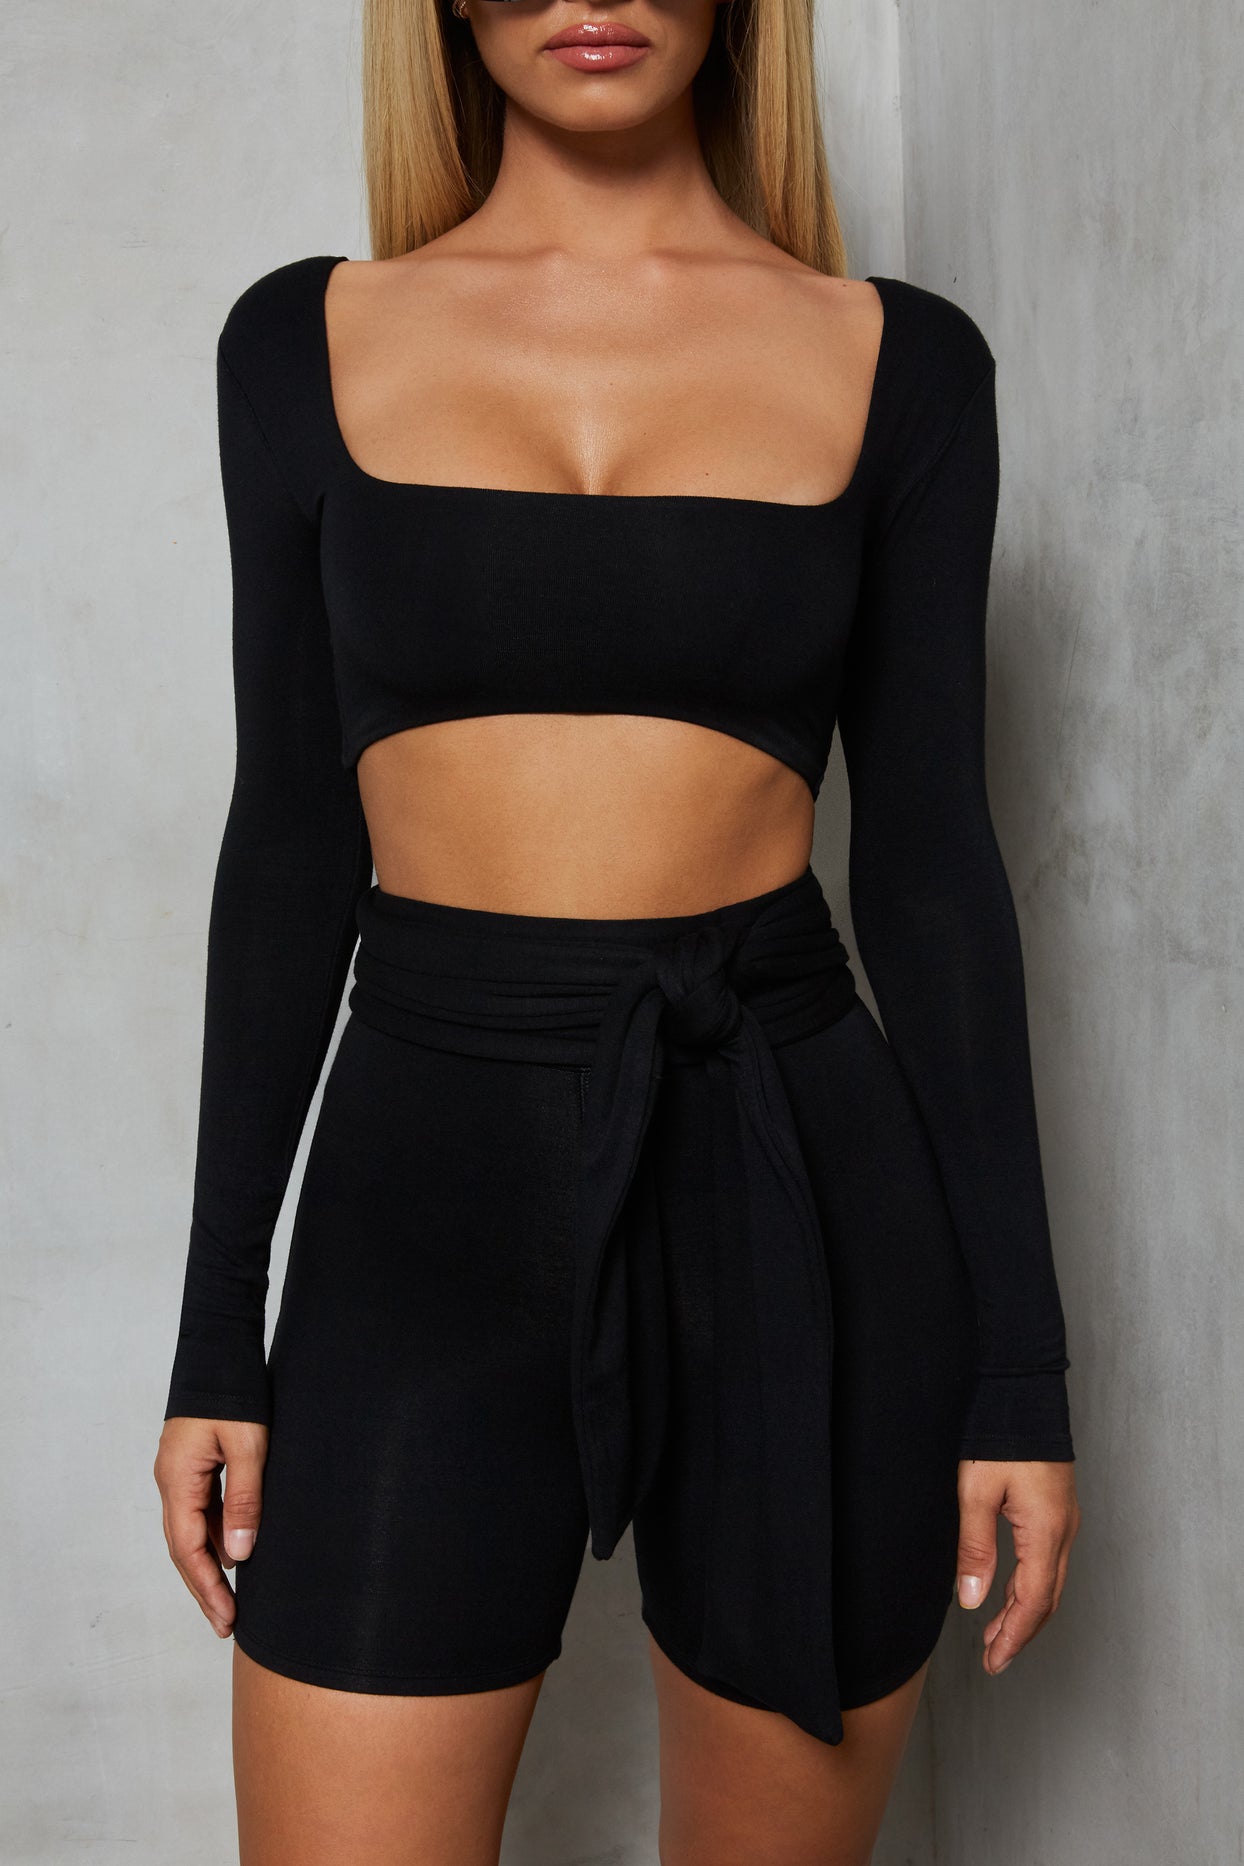 Shorty On The Side Long Sleeve Crop Top in Black